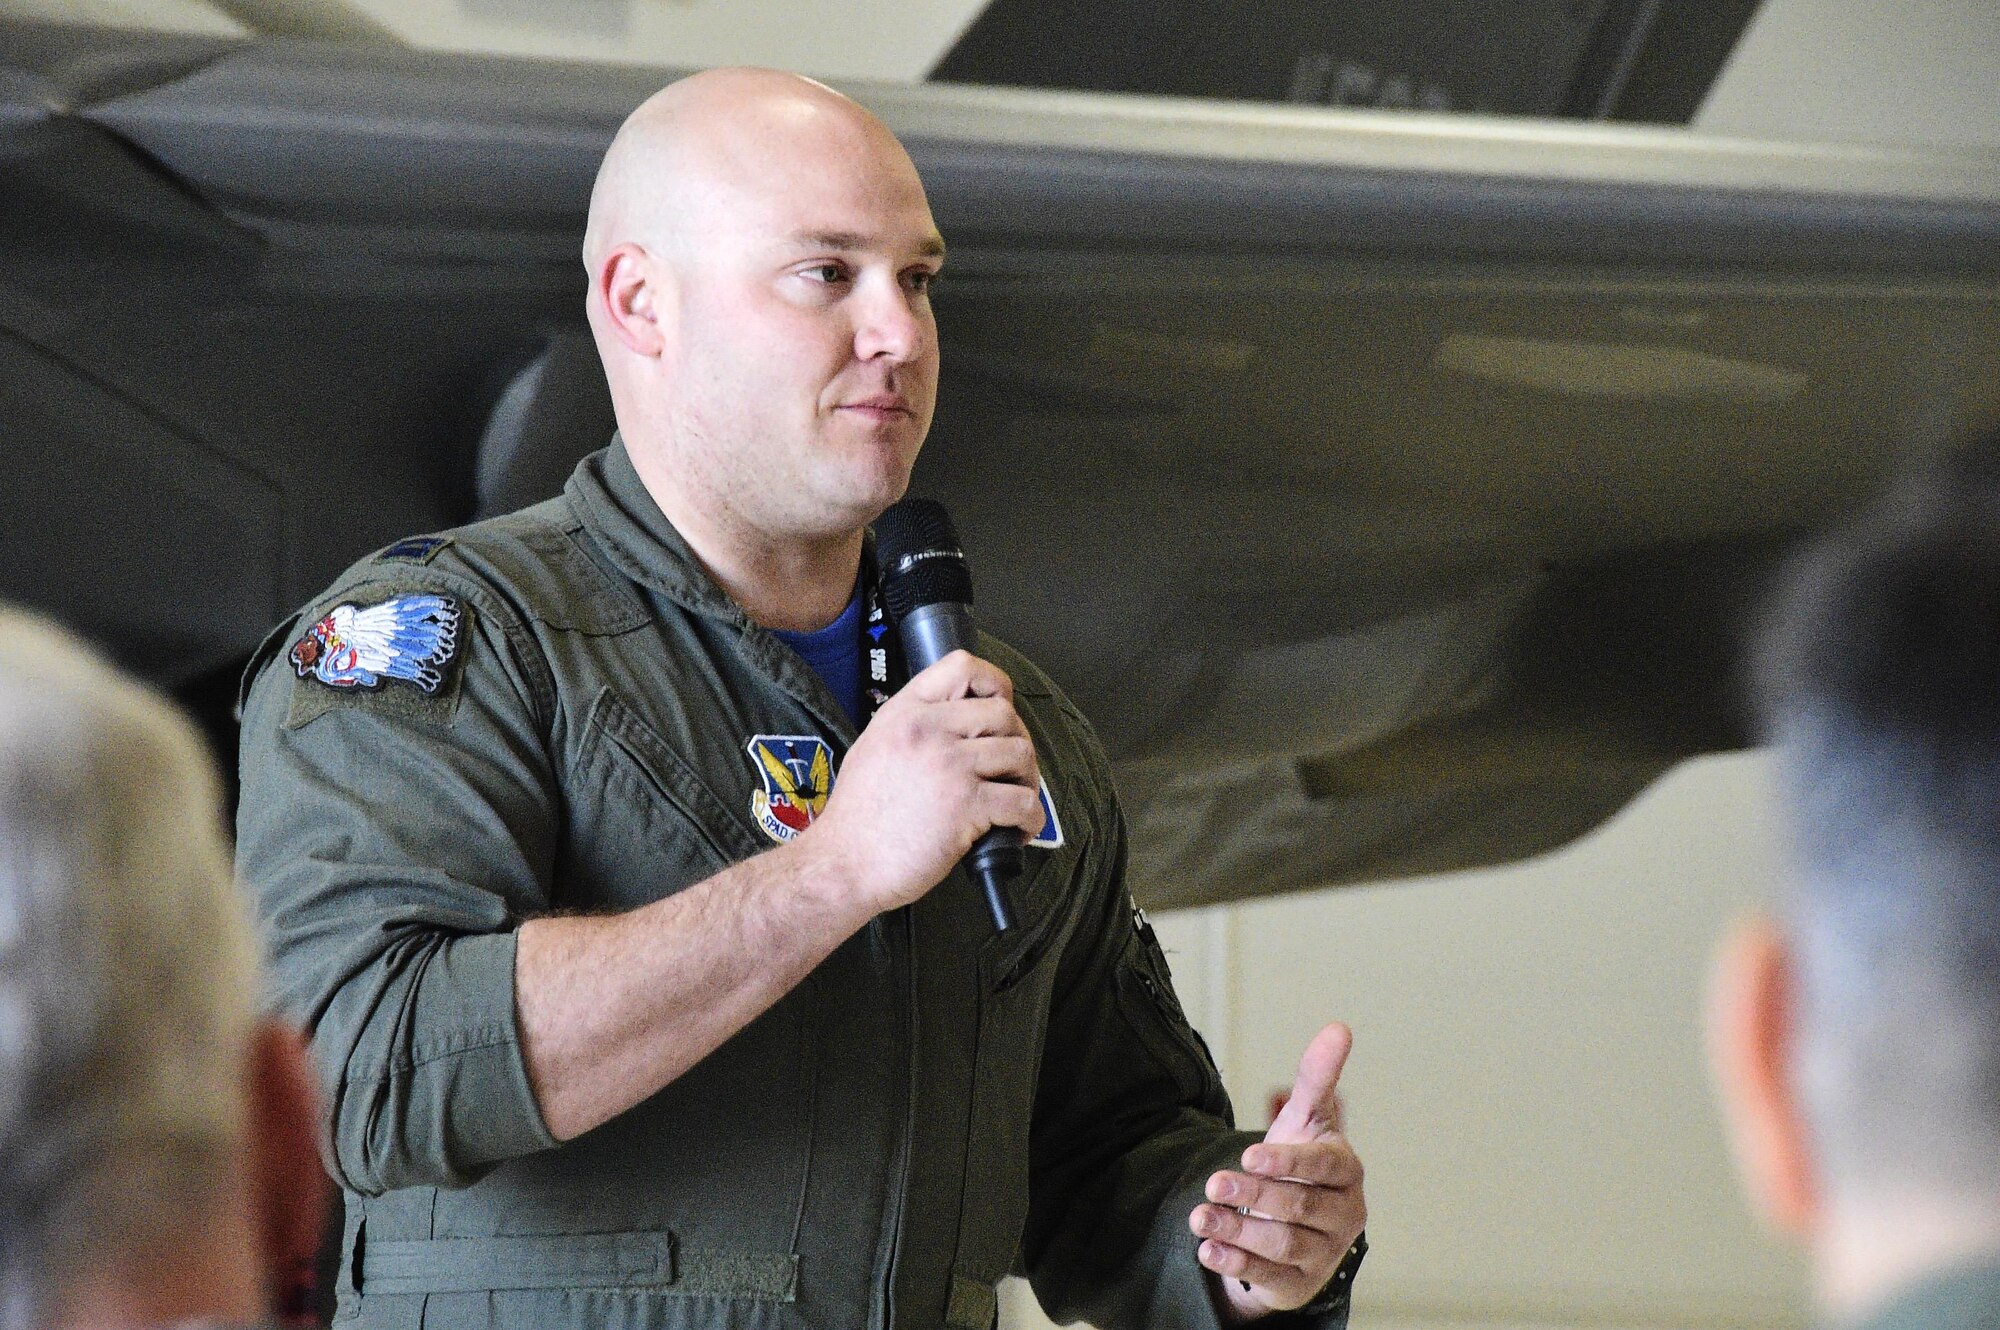 Capt. "Deuce" briefs distinguished visitors about the capabilities of the F-35 joint strike fighter Friday (May 5) at Volk Field Combat Readiness Training Center. Volk Field is hosting Northern Lightning, an annual counterland training exercise that began May 1 and will end May 12. The exercise will involve aircraft and personnel from multiple active duty Air Force, National Guard and Navy. Northern Lightning is one of seven Air National Guard joint accredited exercises held at a Combat Readiness Training Center. The two-week long exercise will provide participating units a tactical level, joint training environment emphasizing user-defined objectives. Wisconsin Department of Military Affairs photo by Vaughn R. Larson